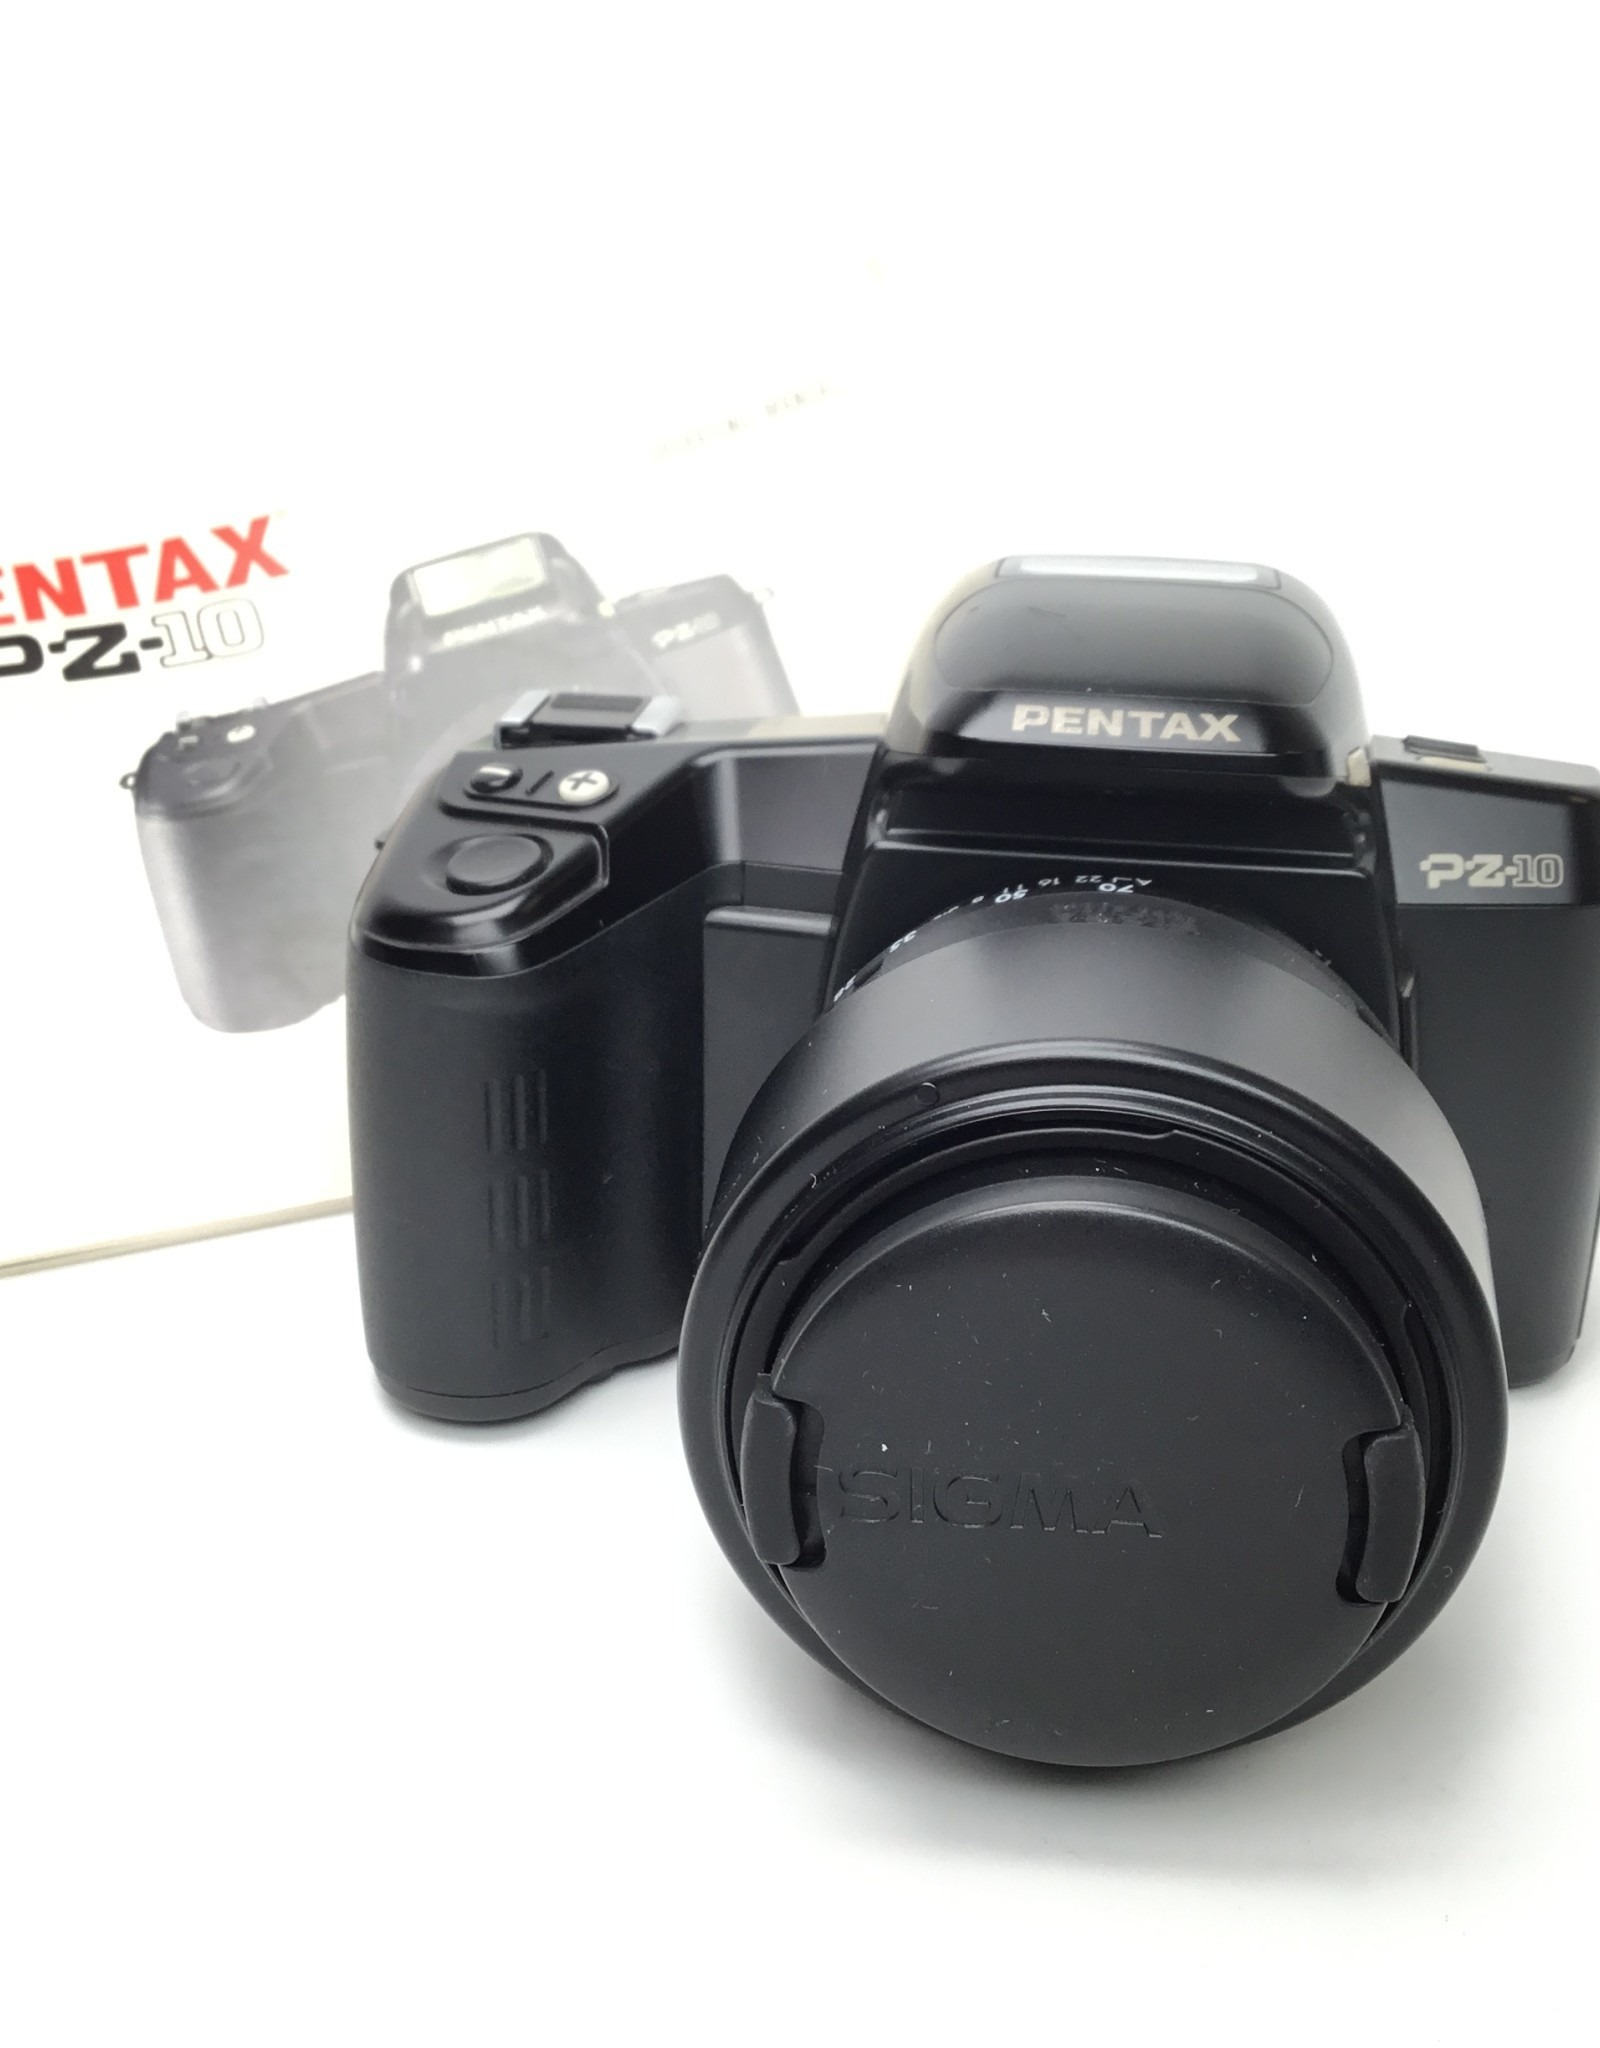 Pentax Pentax PZ-10 Camera with Sigma 28-70mm 90 Day Back Warranty Used Good